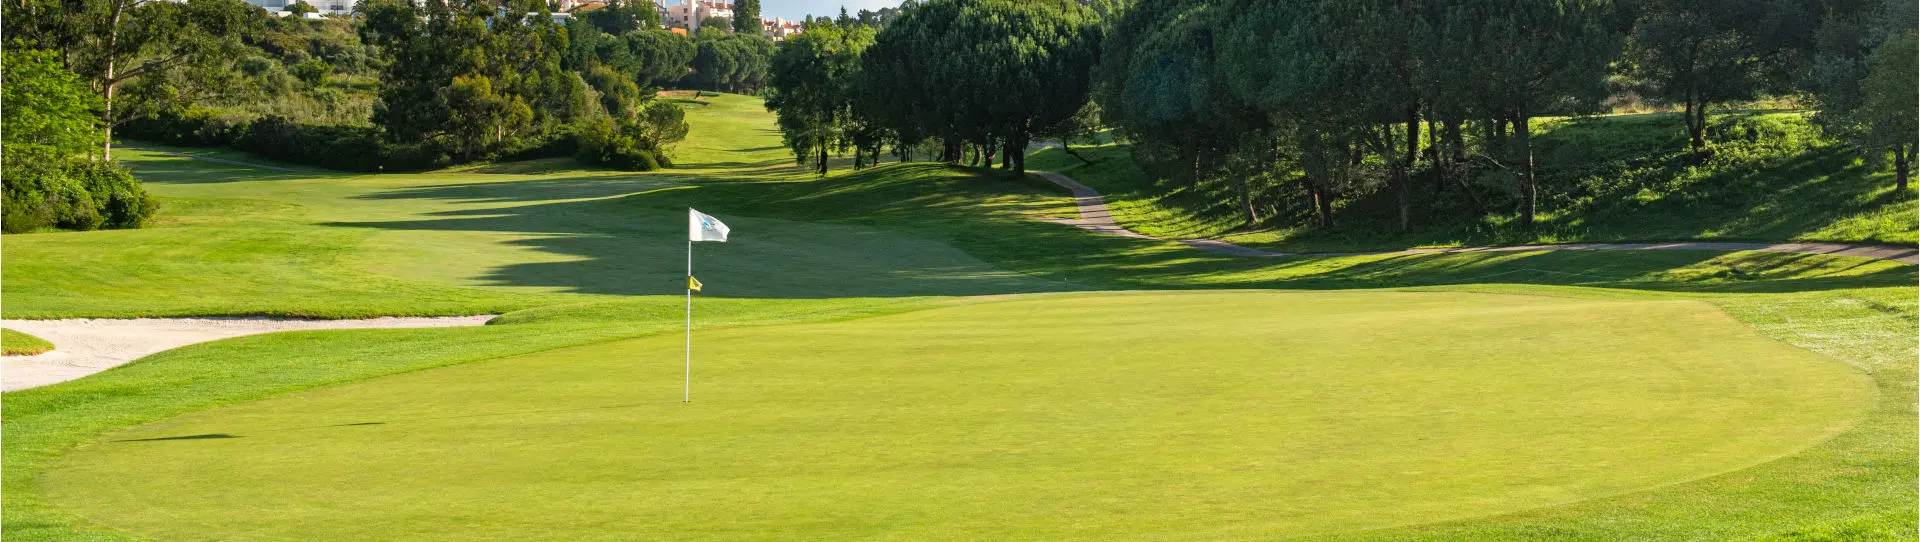 Portugal golf courses - Belas Clube Campo - Photo 2